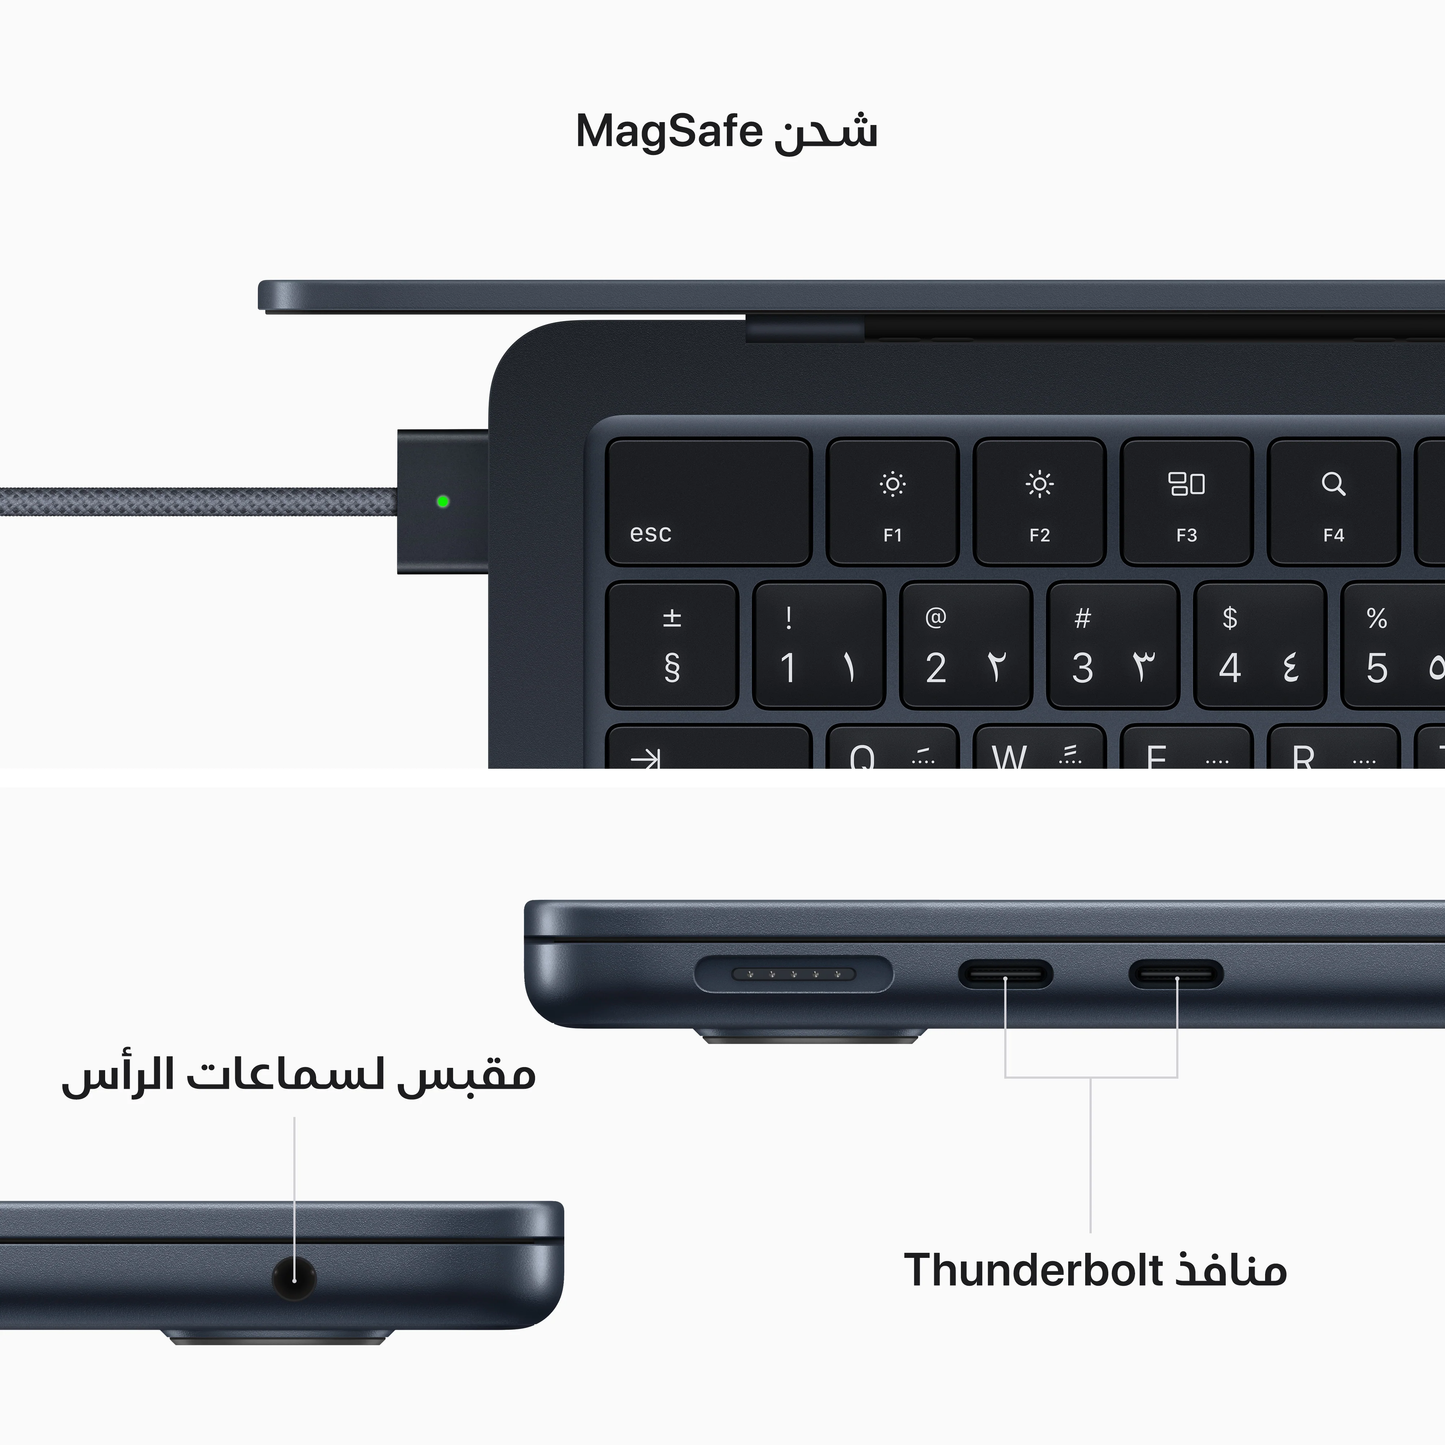 13-inch MacBook Air: Apple M2 chip with 8_core CPU and 10_core GPU, 16GB unified memory - 1TB SSD - 67W Adapter - Midnight